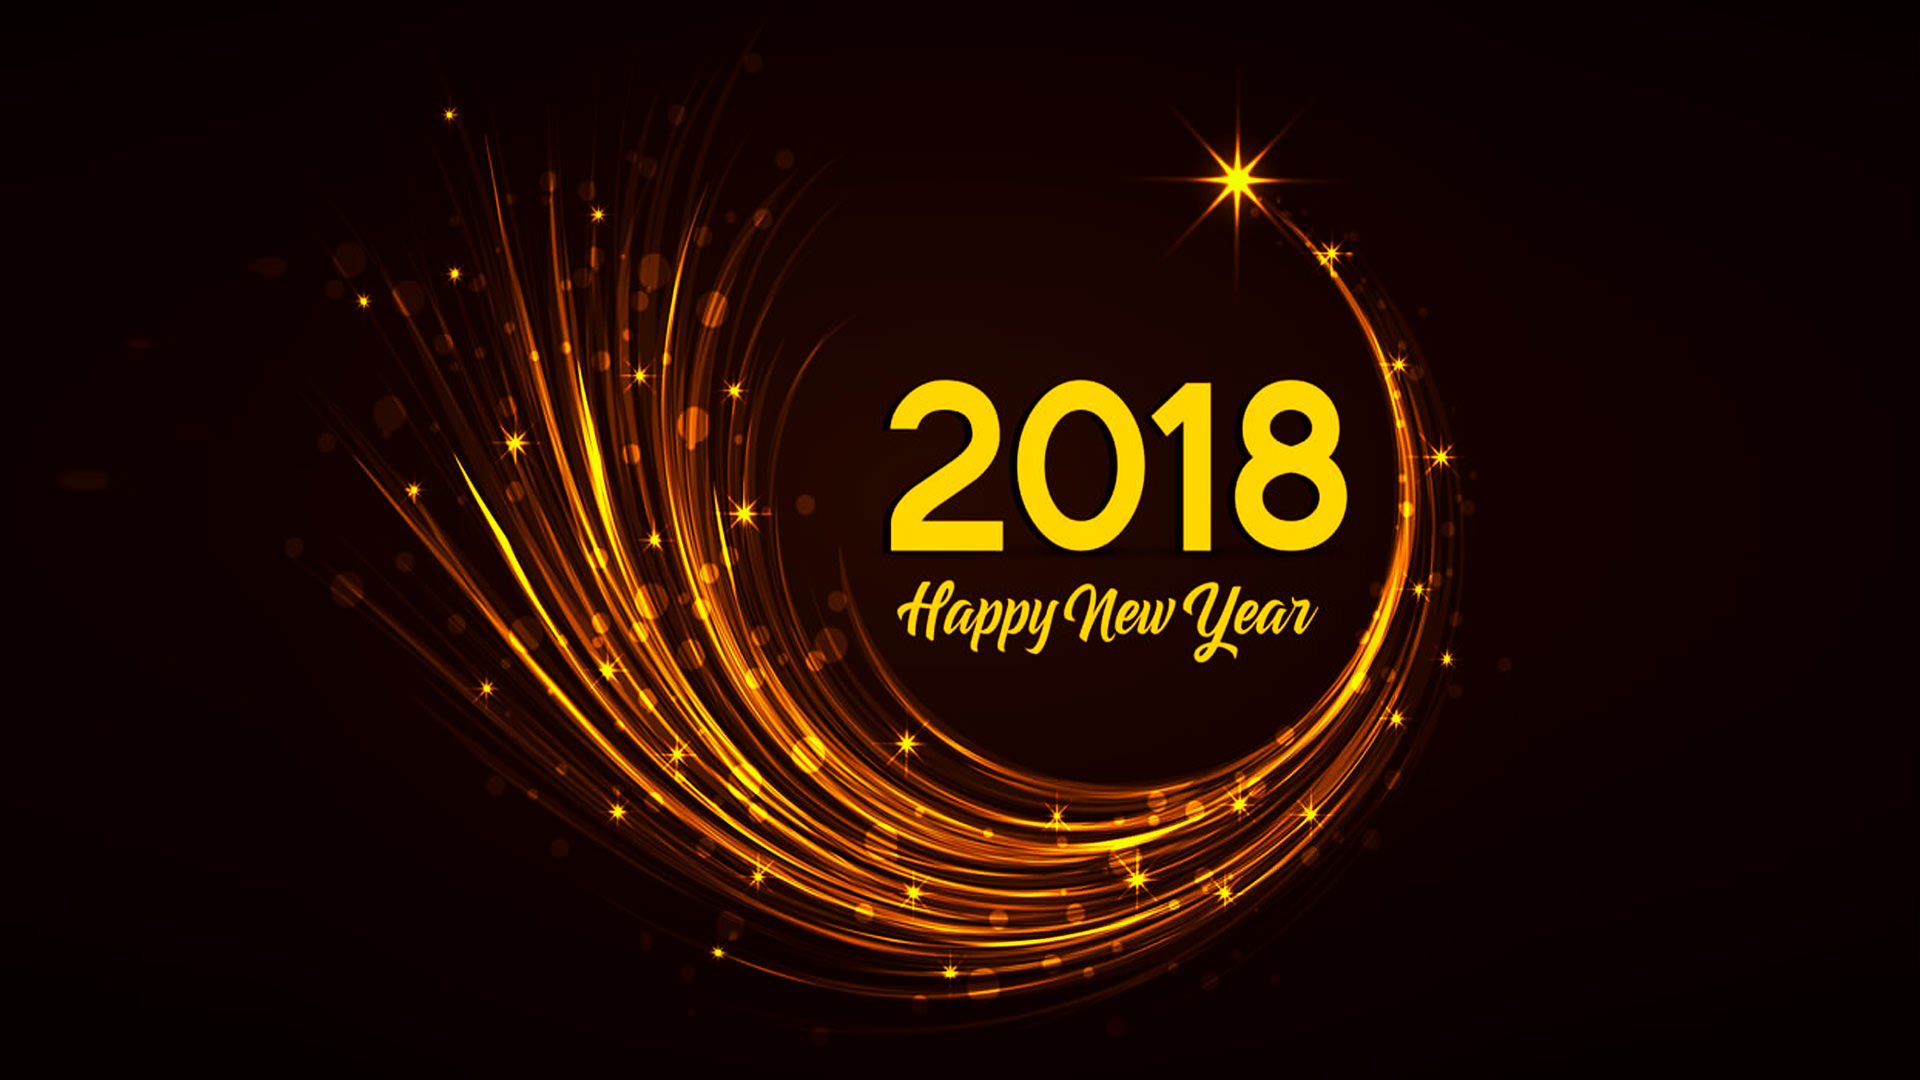 Special Happy New Year Wallpaper HD Greetings